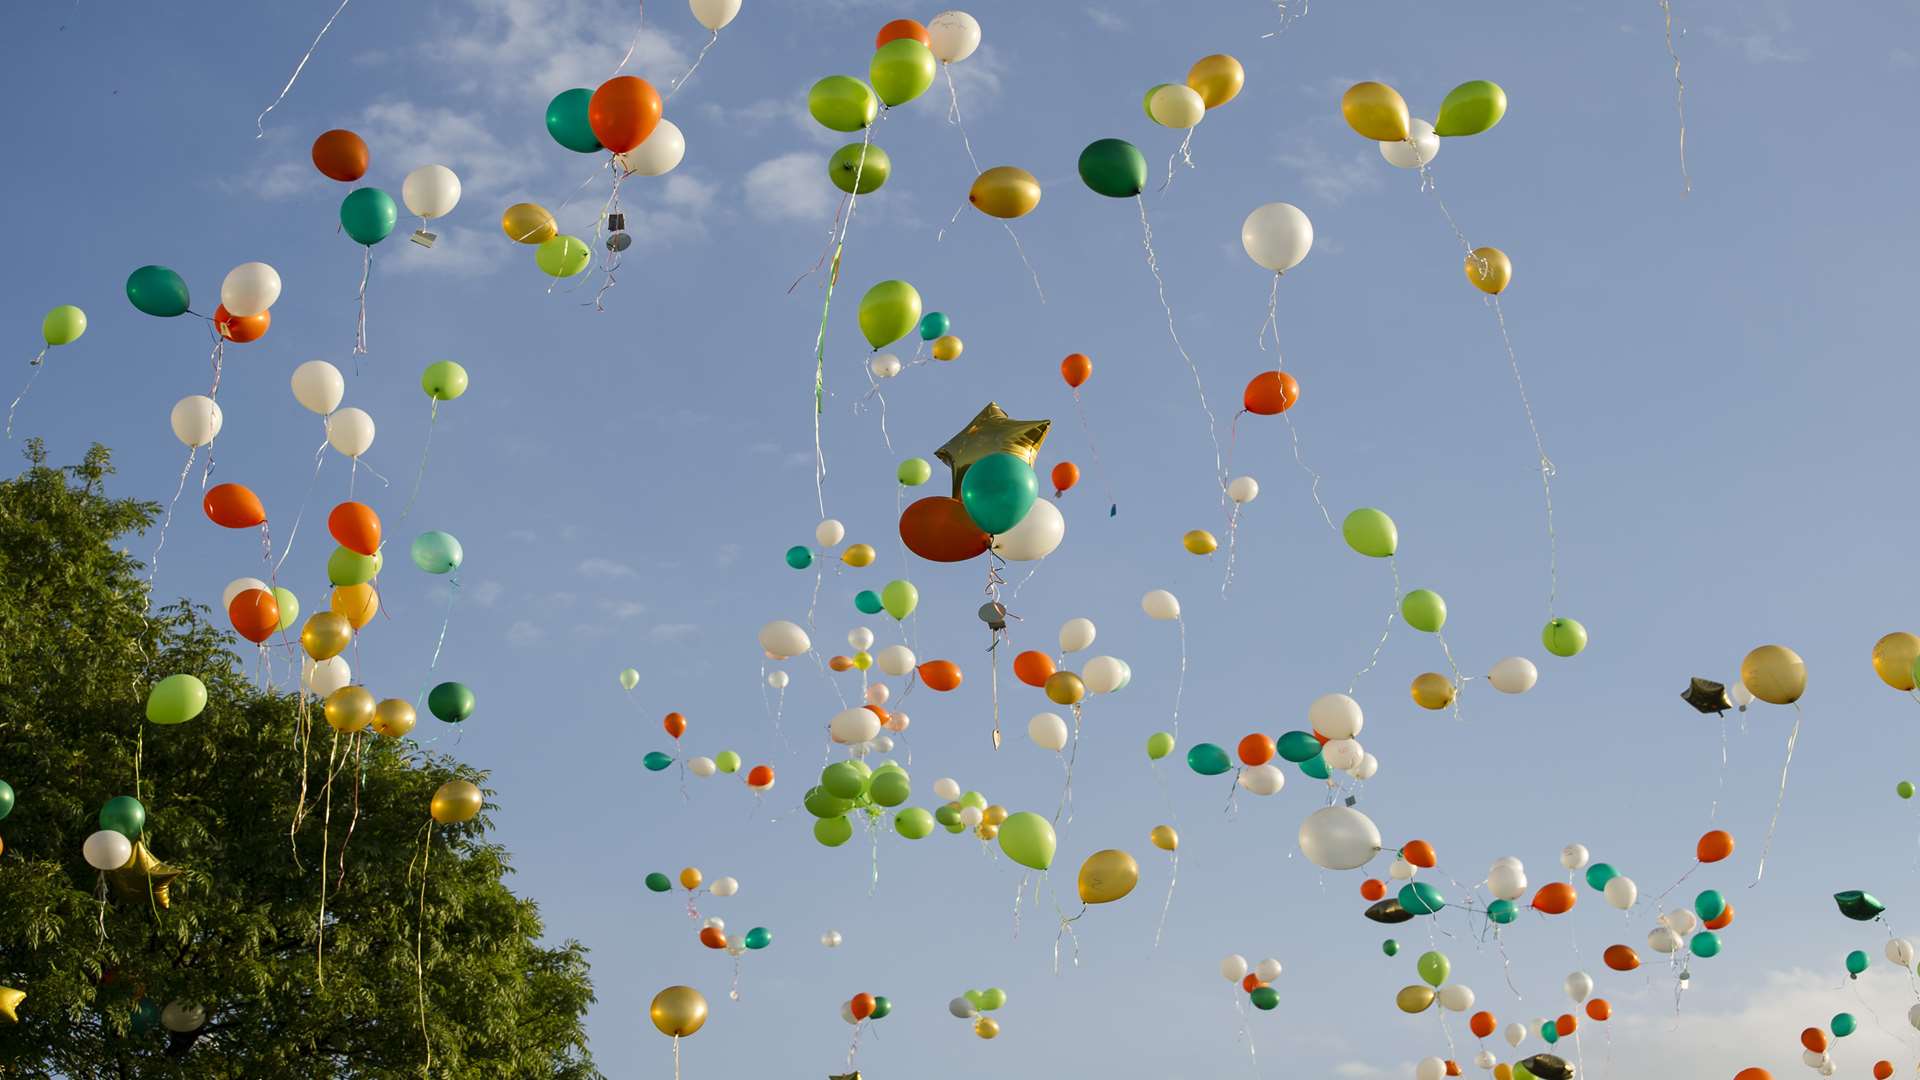 Green, white and gold balloons were released into the air